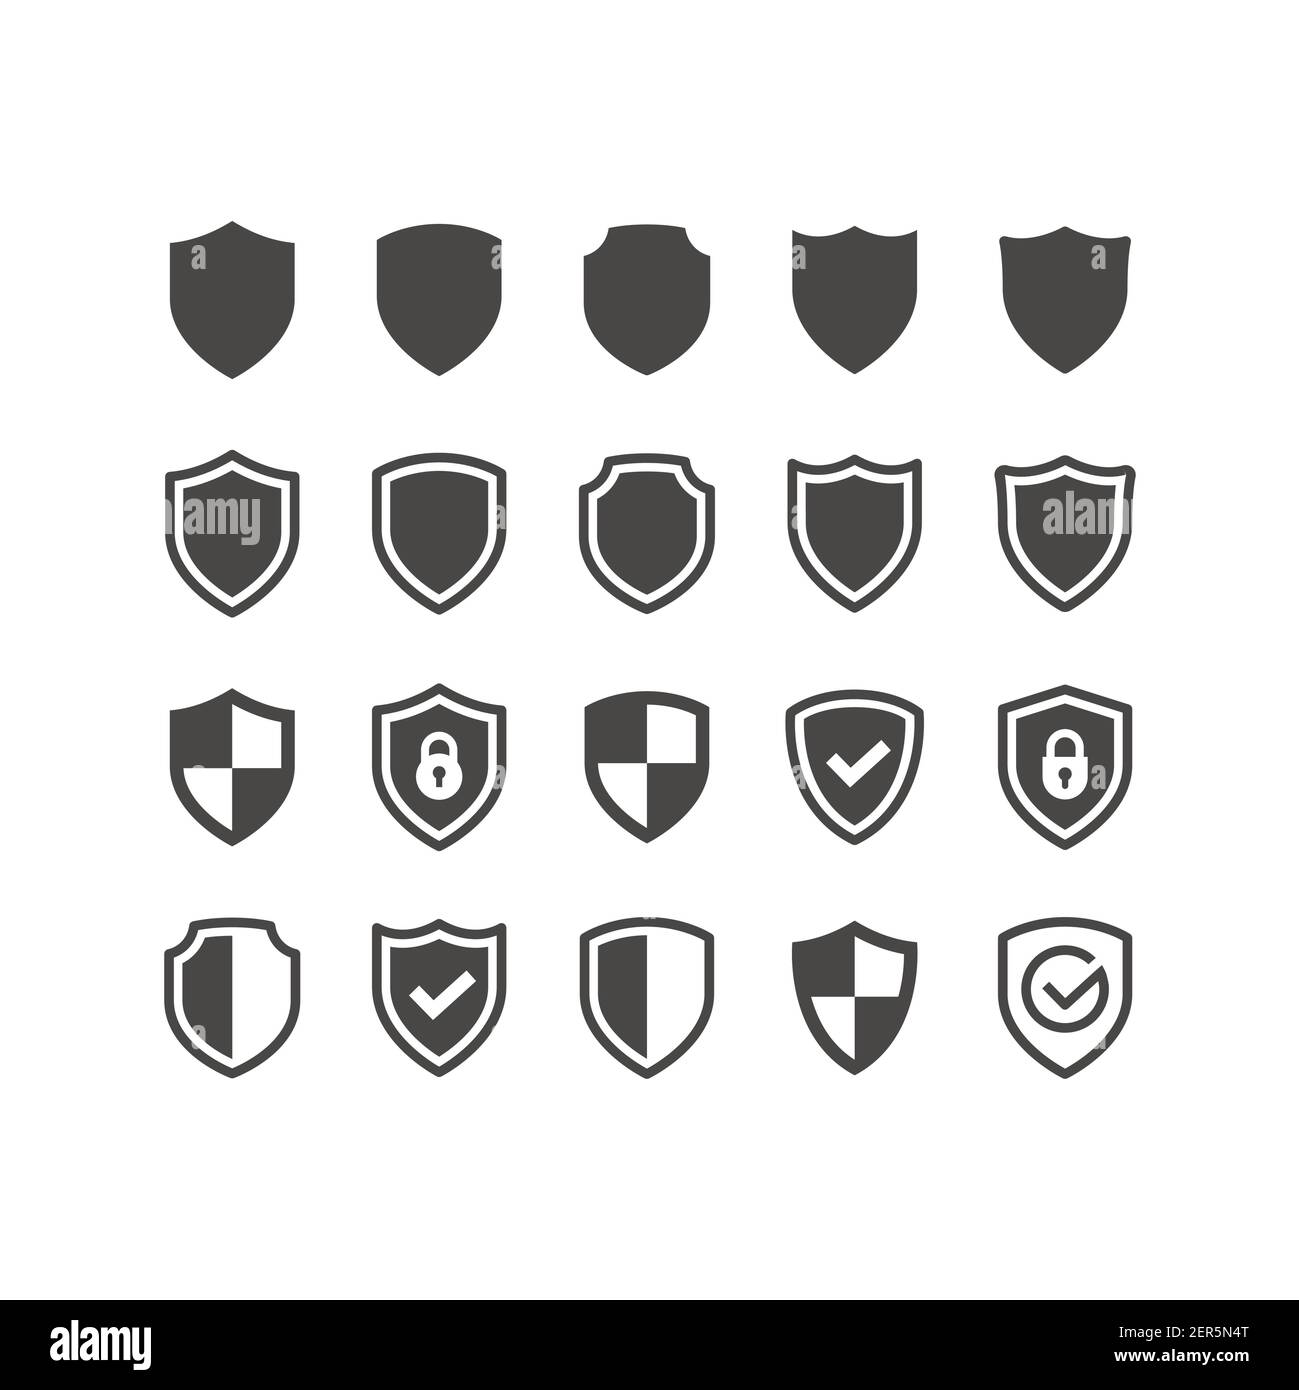 Shield black vector icon set. Shields with checkmark or tick symbol and padlock glyph icons. Stock Vector